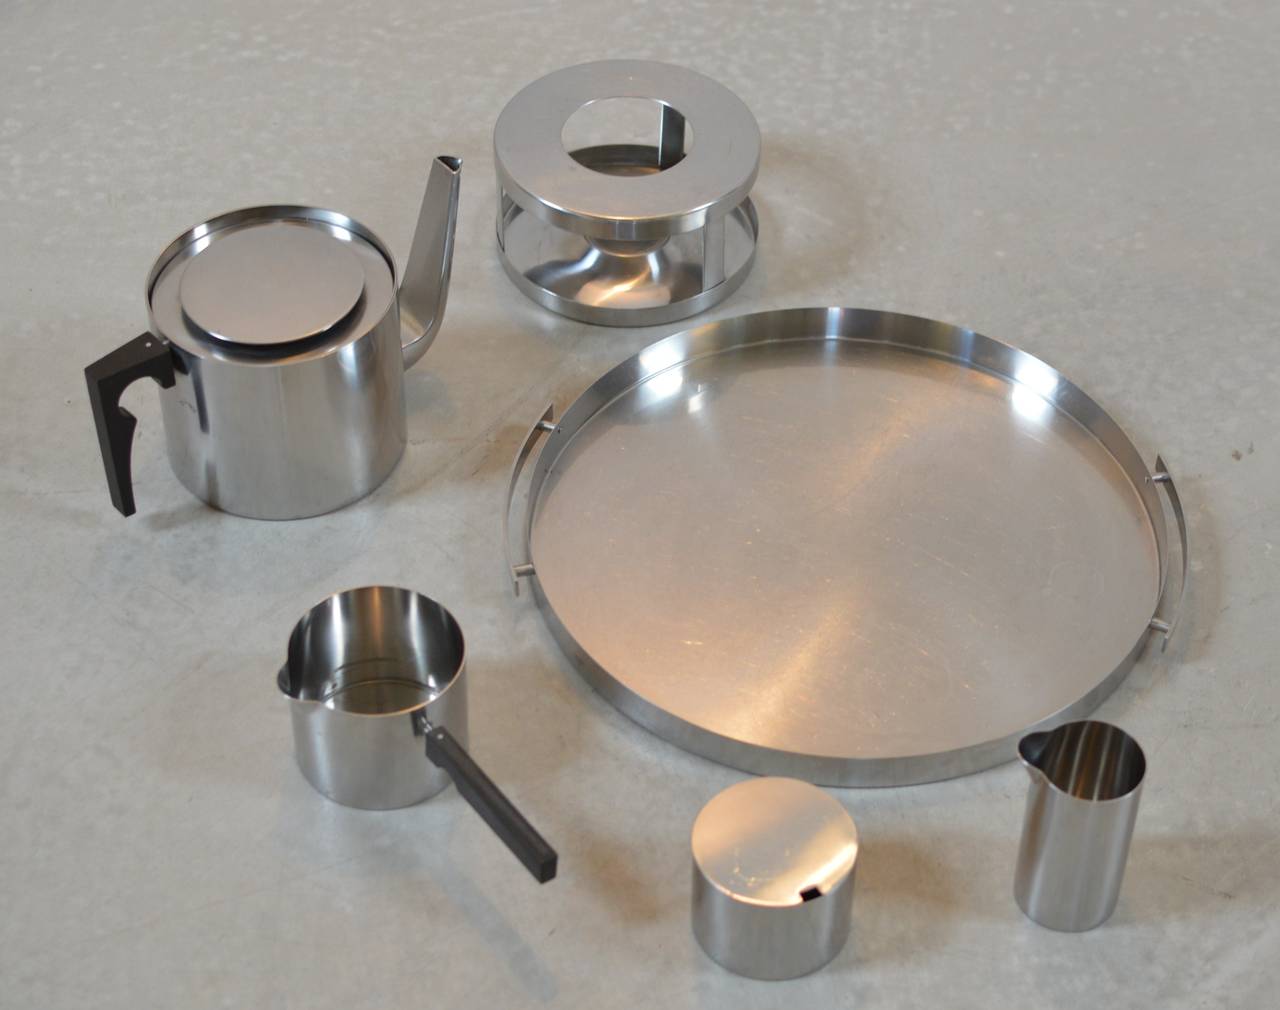 Complete Cylinda Line stainless steel tea service, designed in 1967 by Arne Jacobsen manufactured by Stelton Denmark consisting of:
1 large round serving tray with handles. 14.13